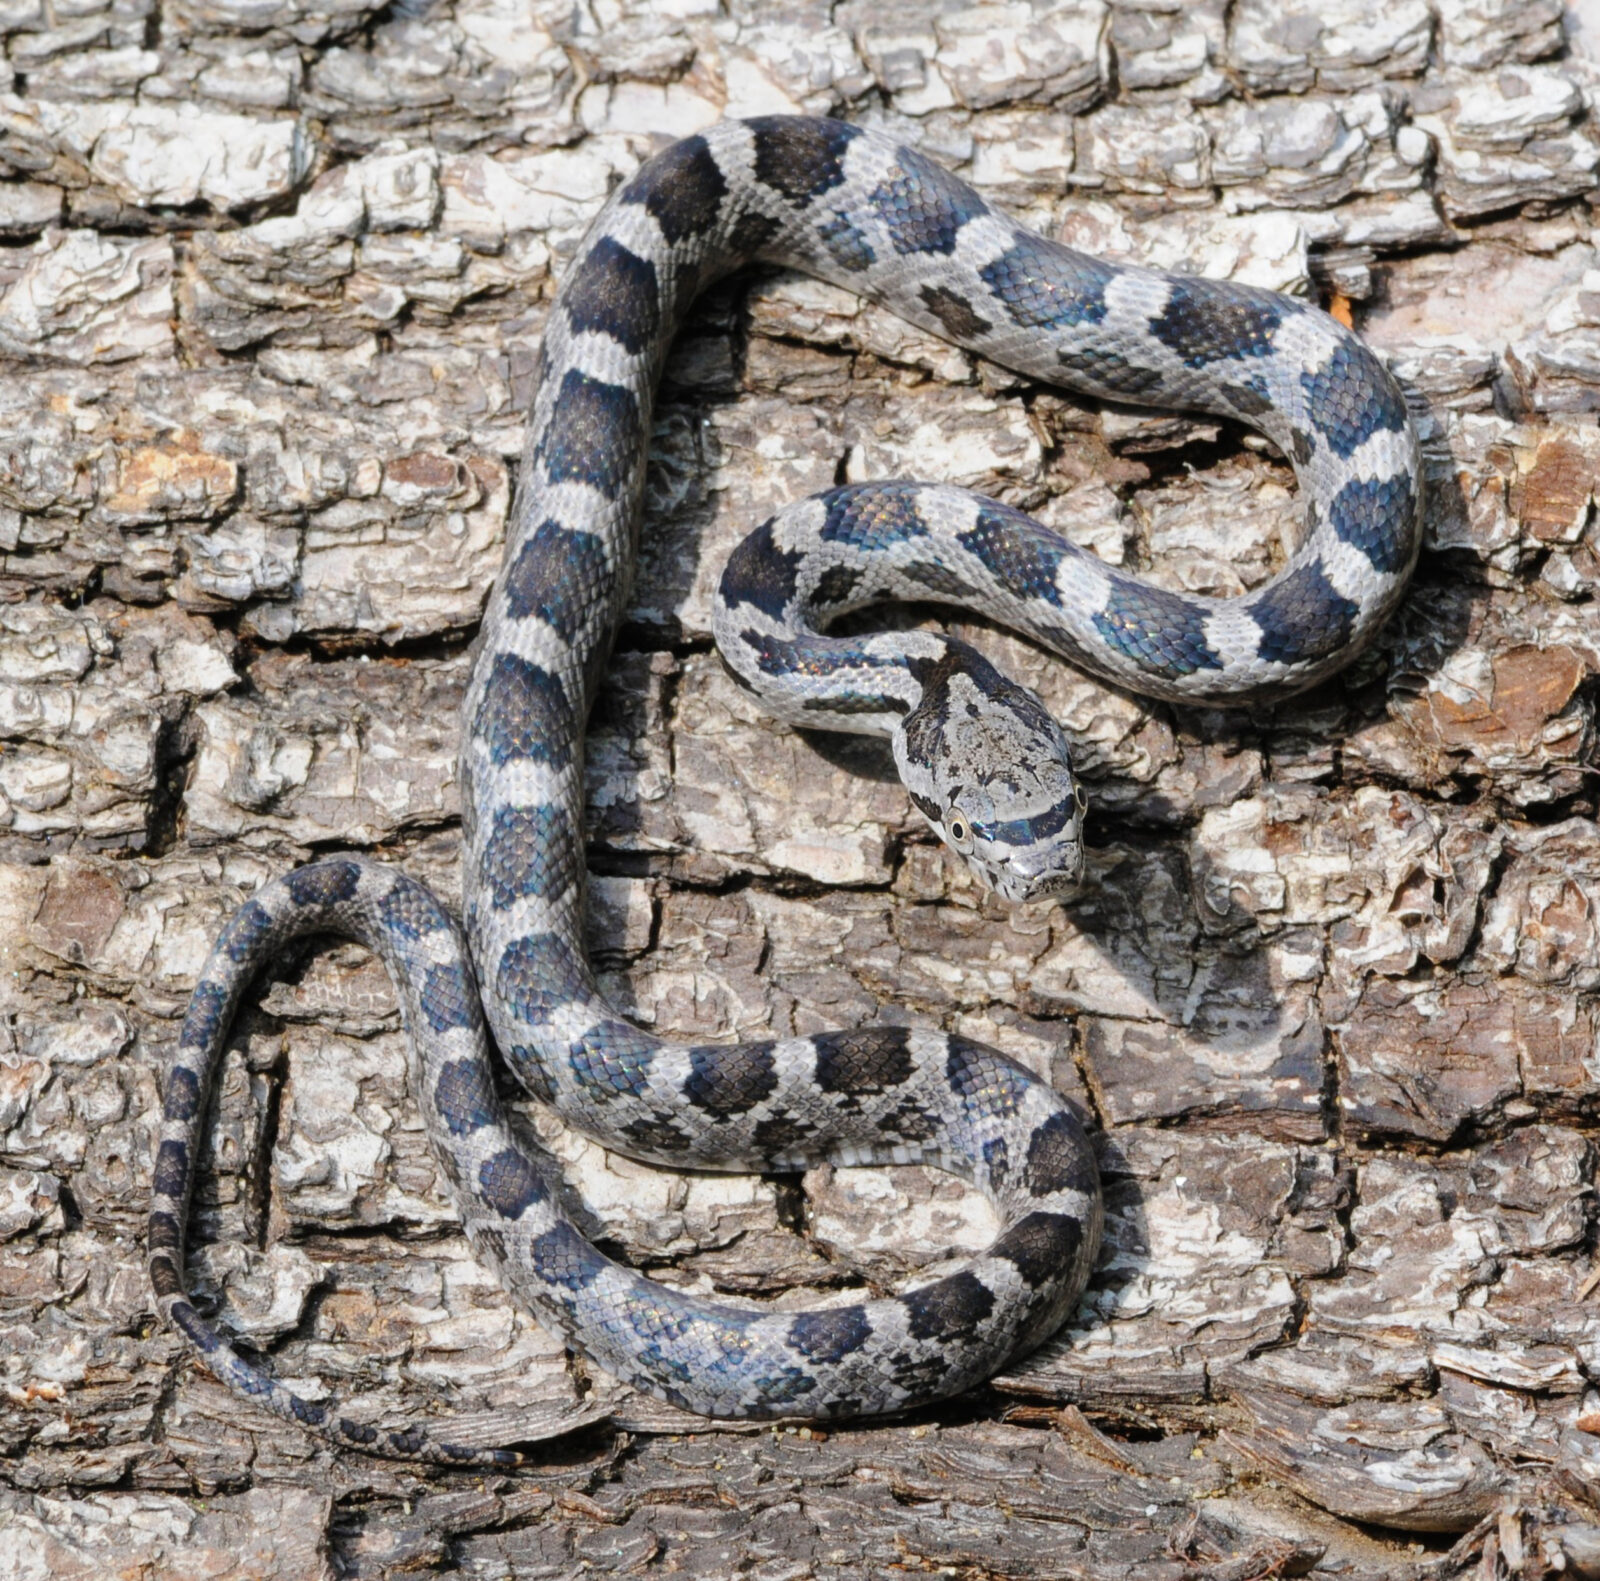 An image of a juvenile Eastern Ratsnake which can easily be mistaken for a copperhead, with it's most distinctive variation being the spot shape